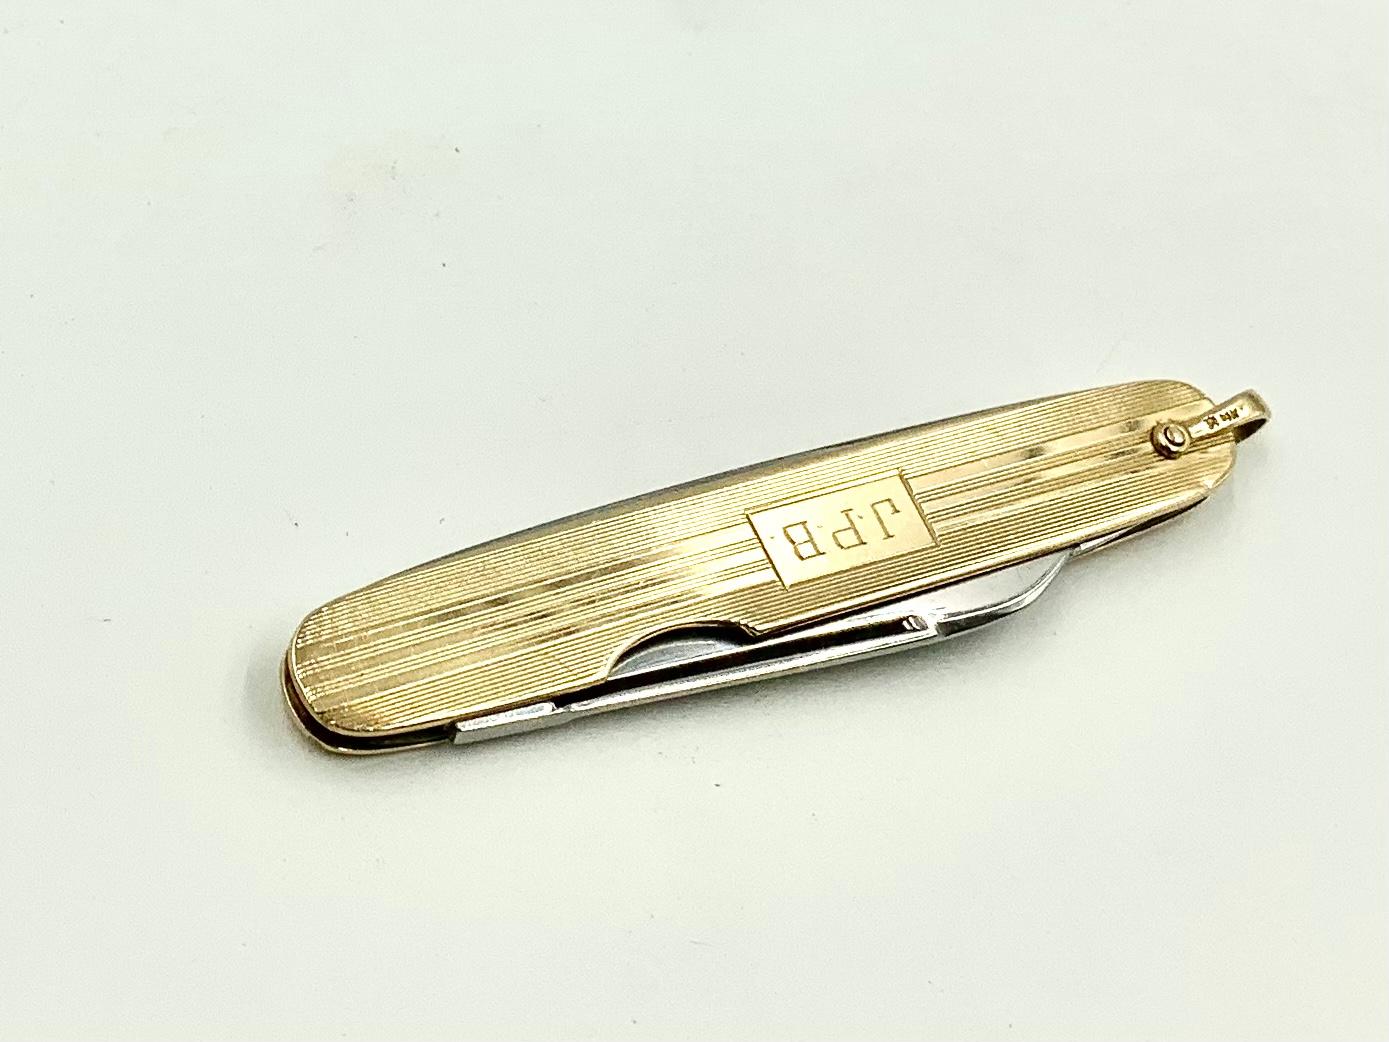 Elegant Art Deco period 14K gold pocket knife.
Excellent condition, two folding blades of different sizes.
Finely engraved with a monogram plate, J.P.B. initials
Perfect for a watch collector or fine accessories aficionado, may be worn on a chain